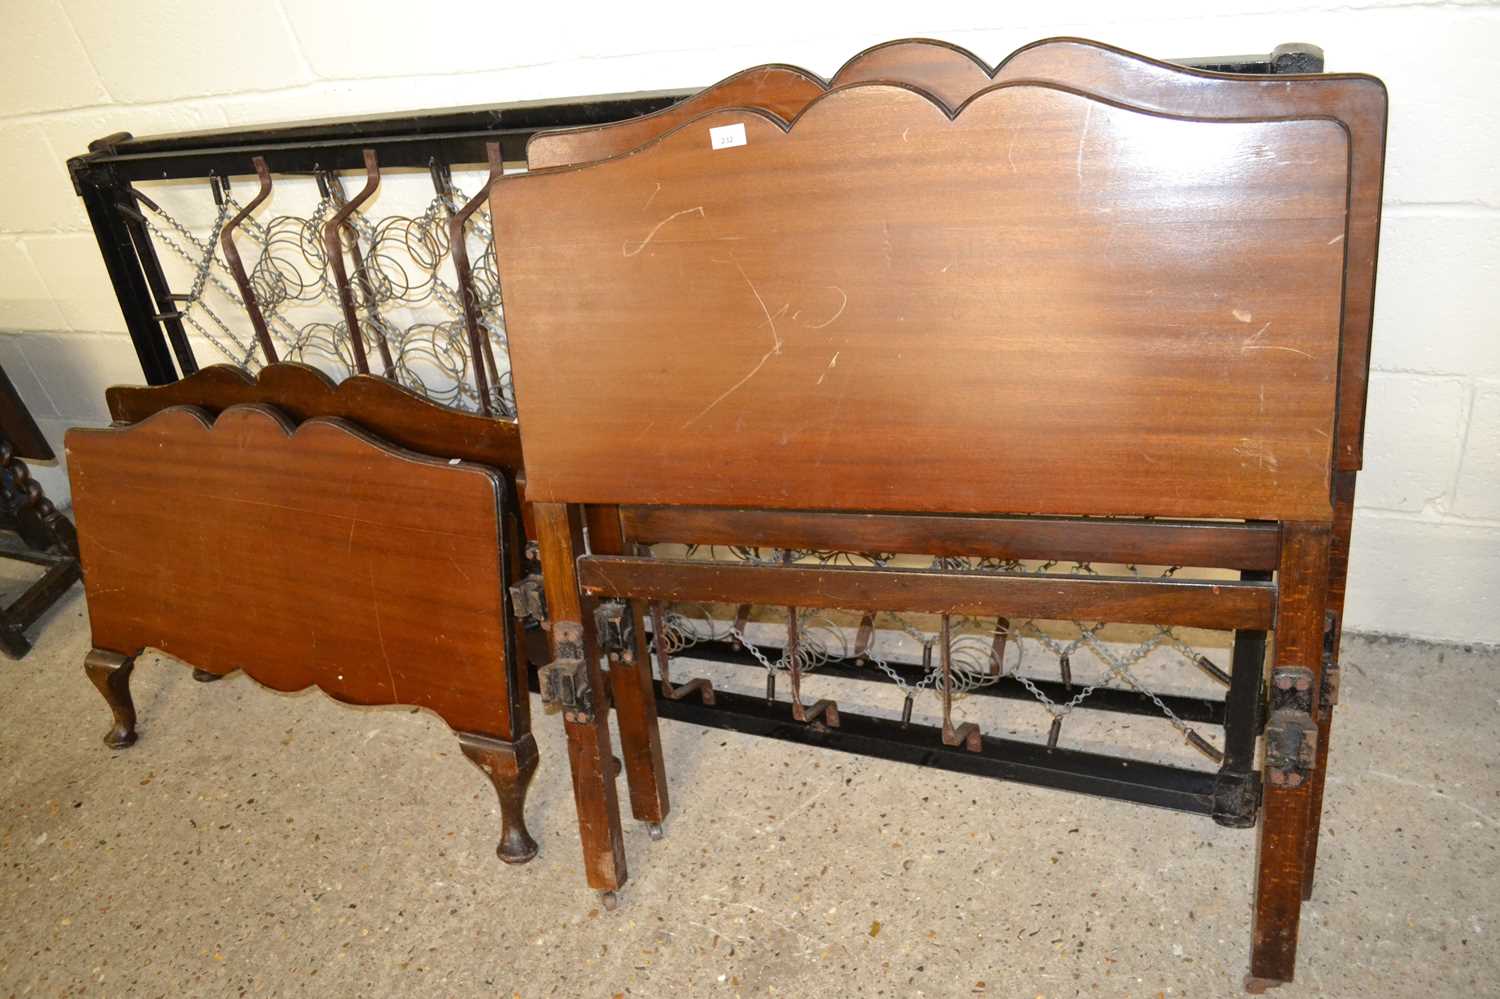 Pair of early 20th Century single bed frames with sprung centres